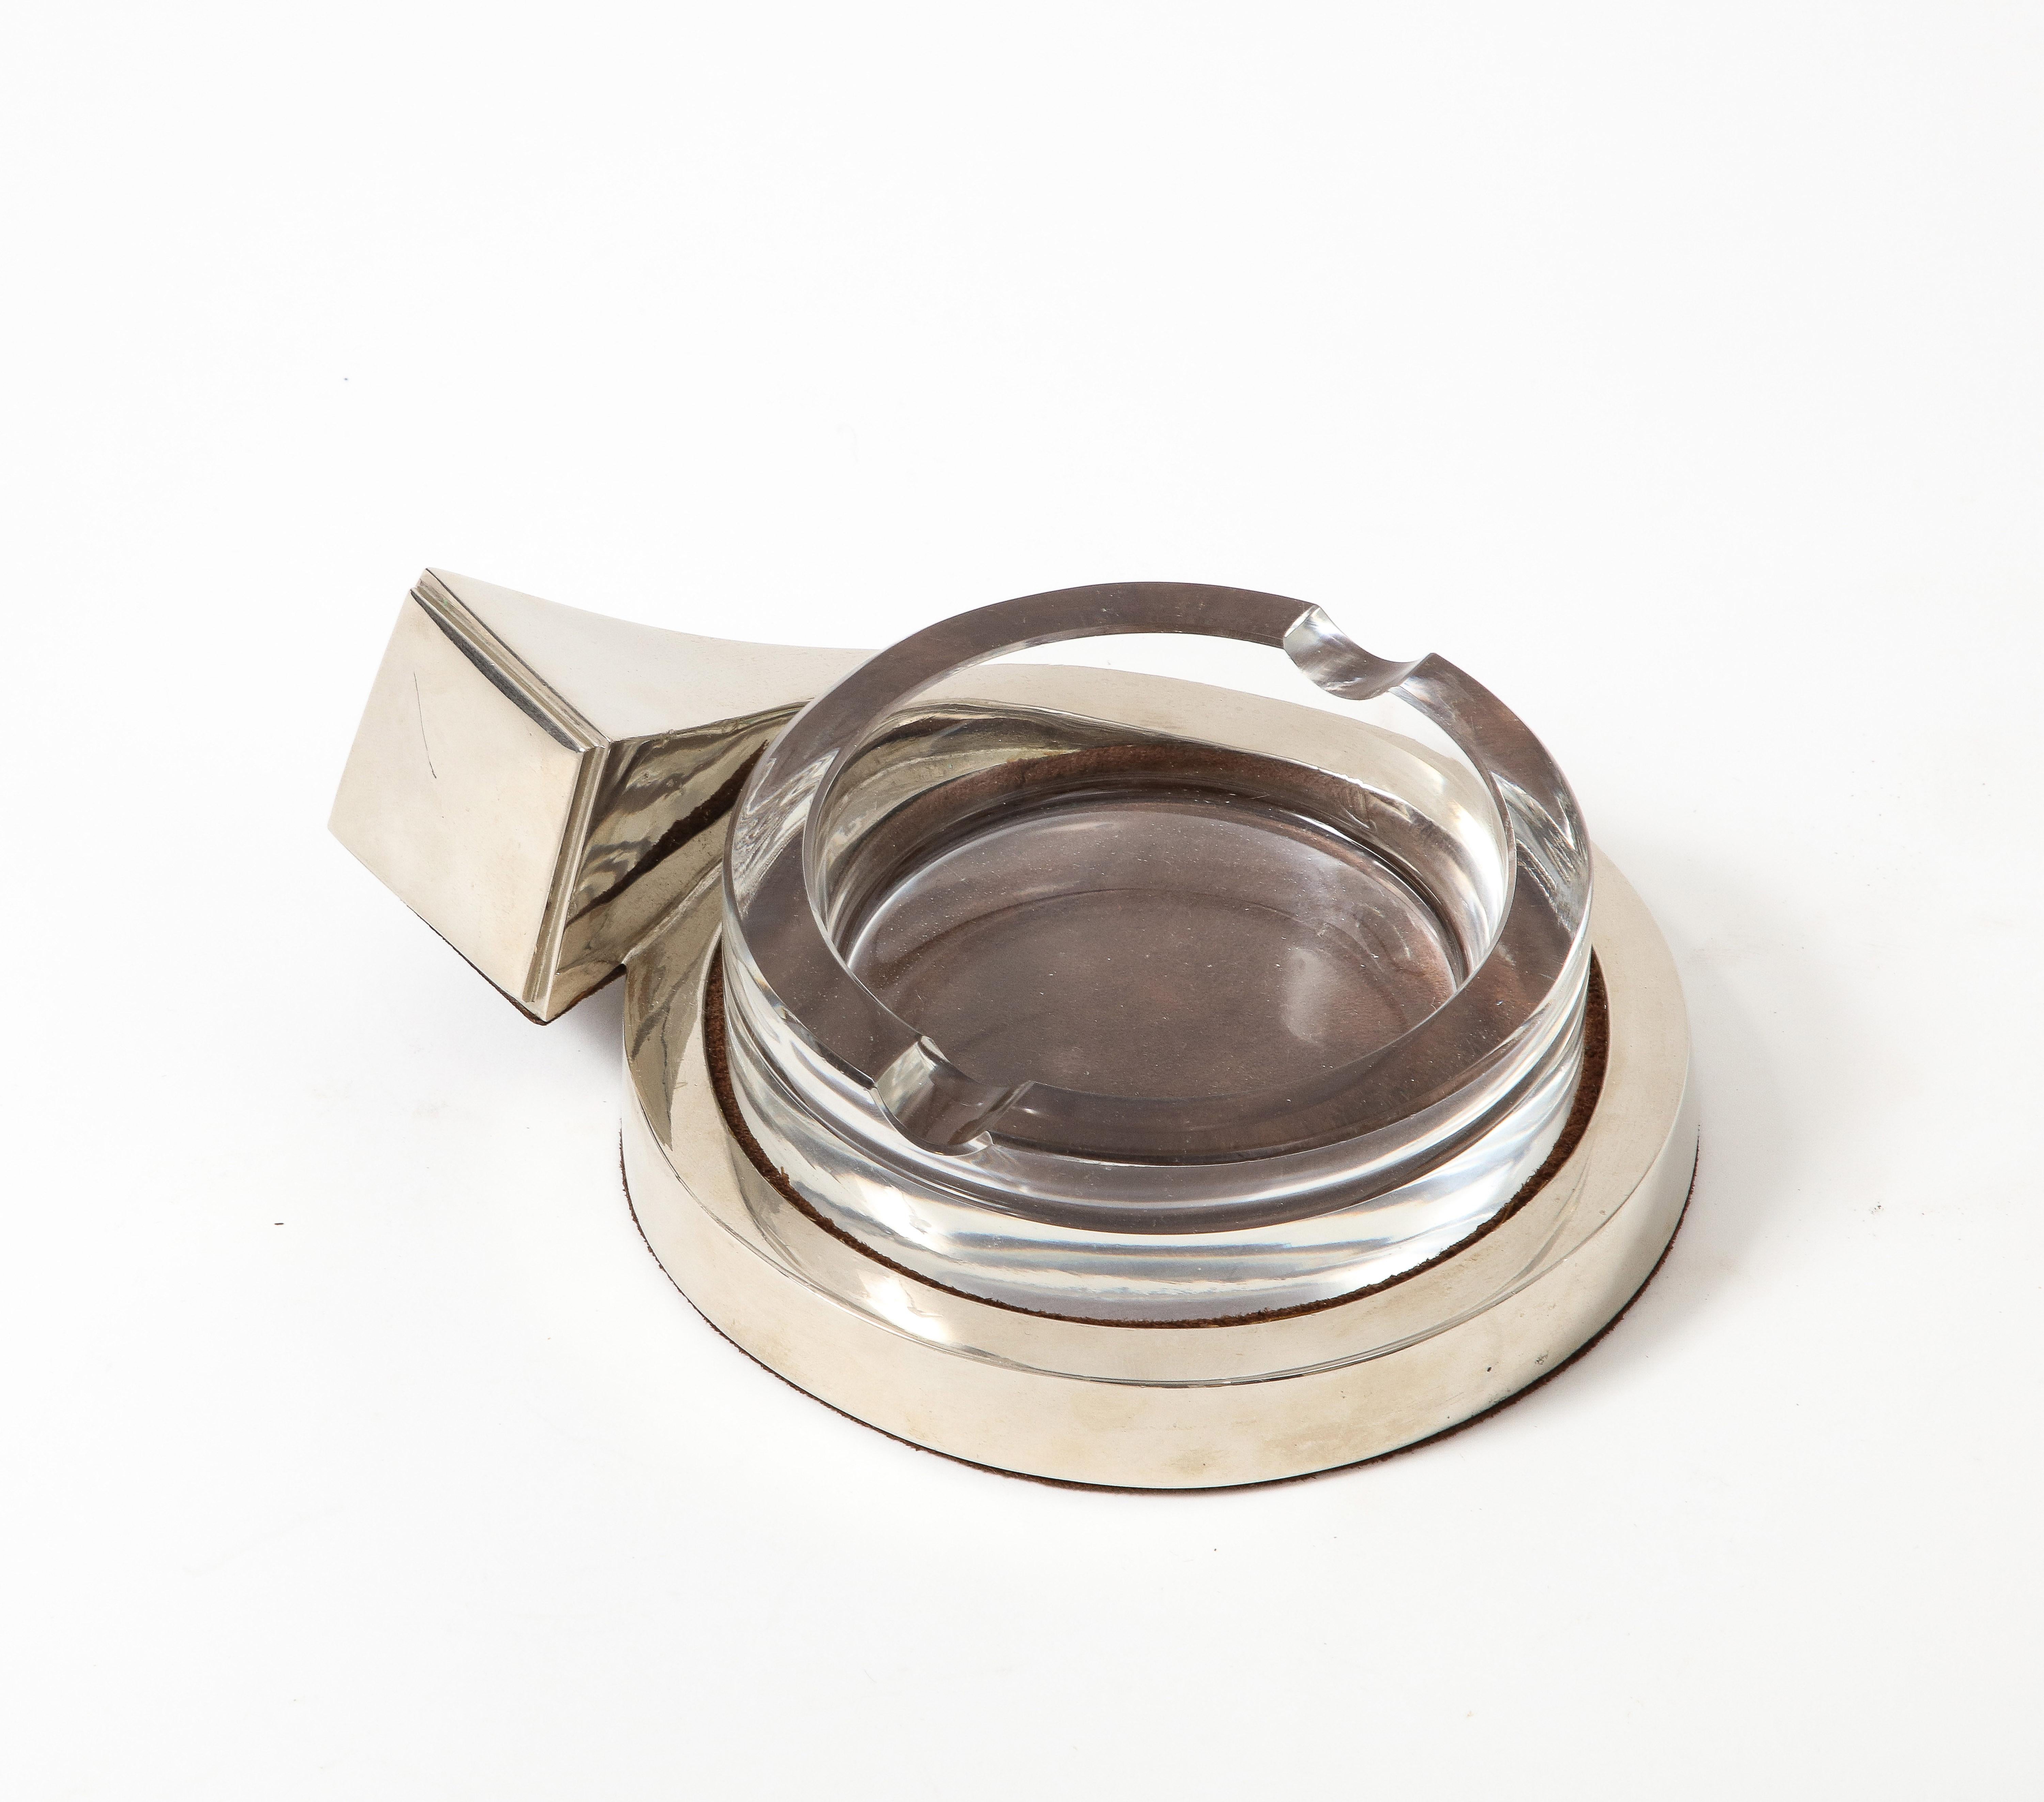 Vintage Gucci ashtray/vide poche featuring bold and modern sterling silver detailing around the glass tray.